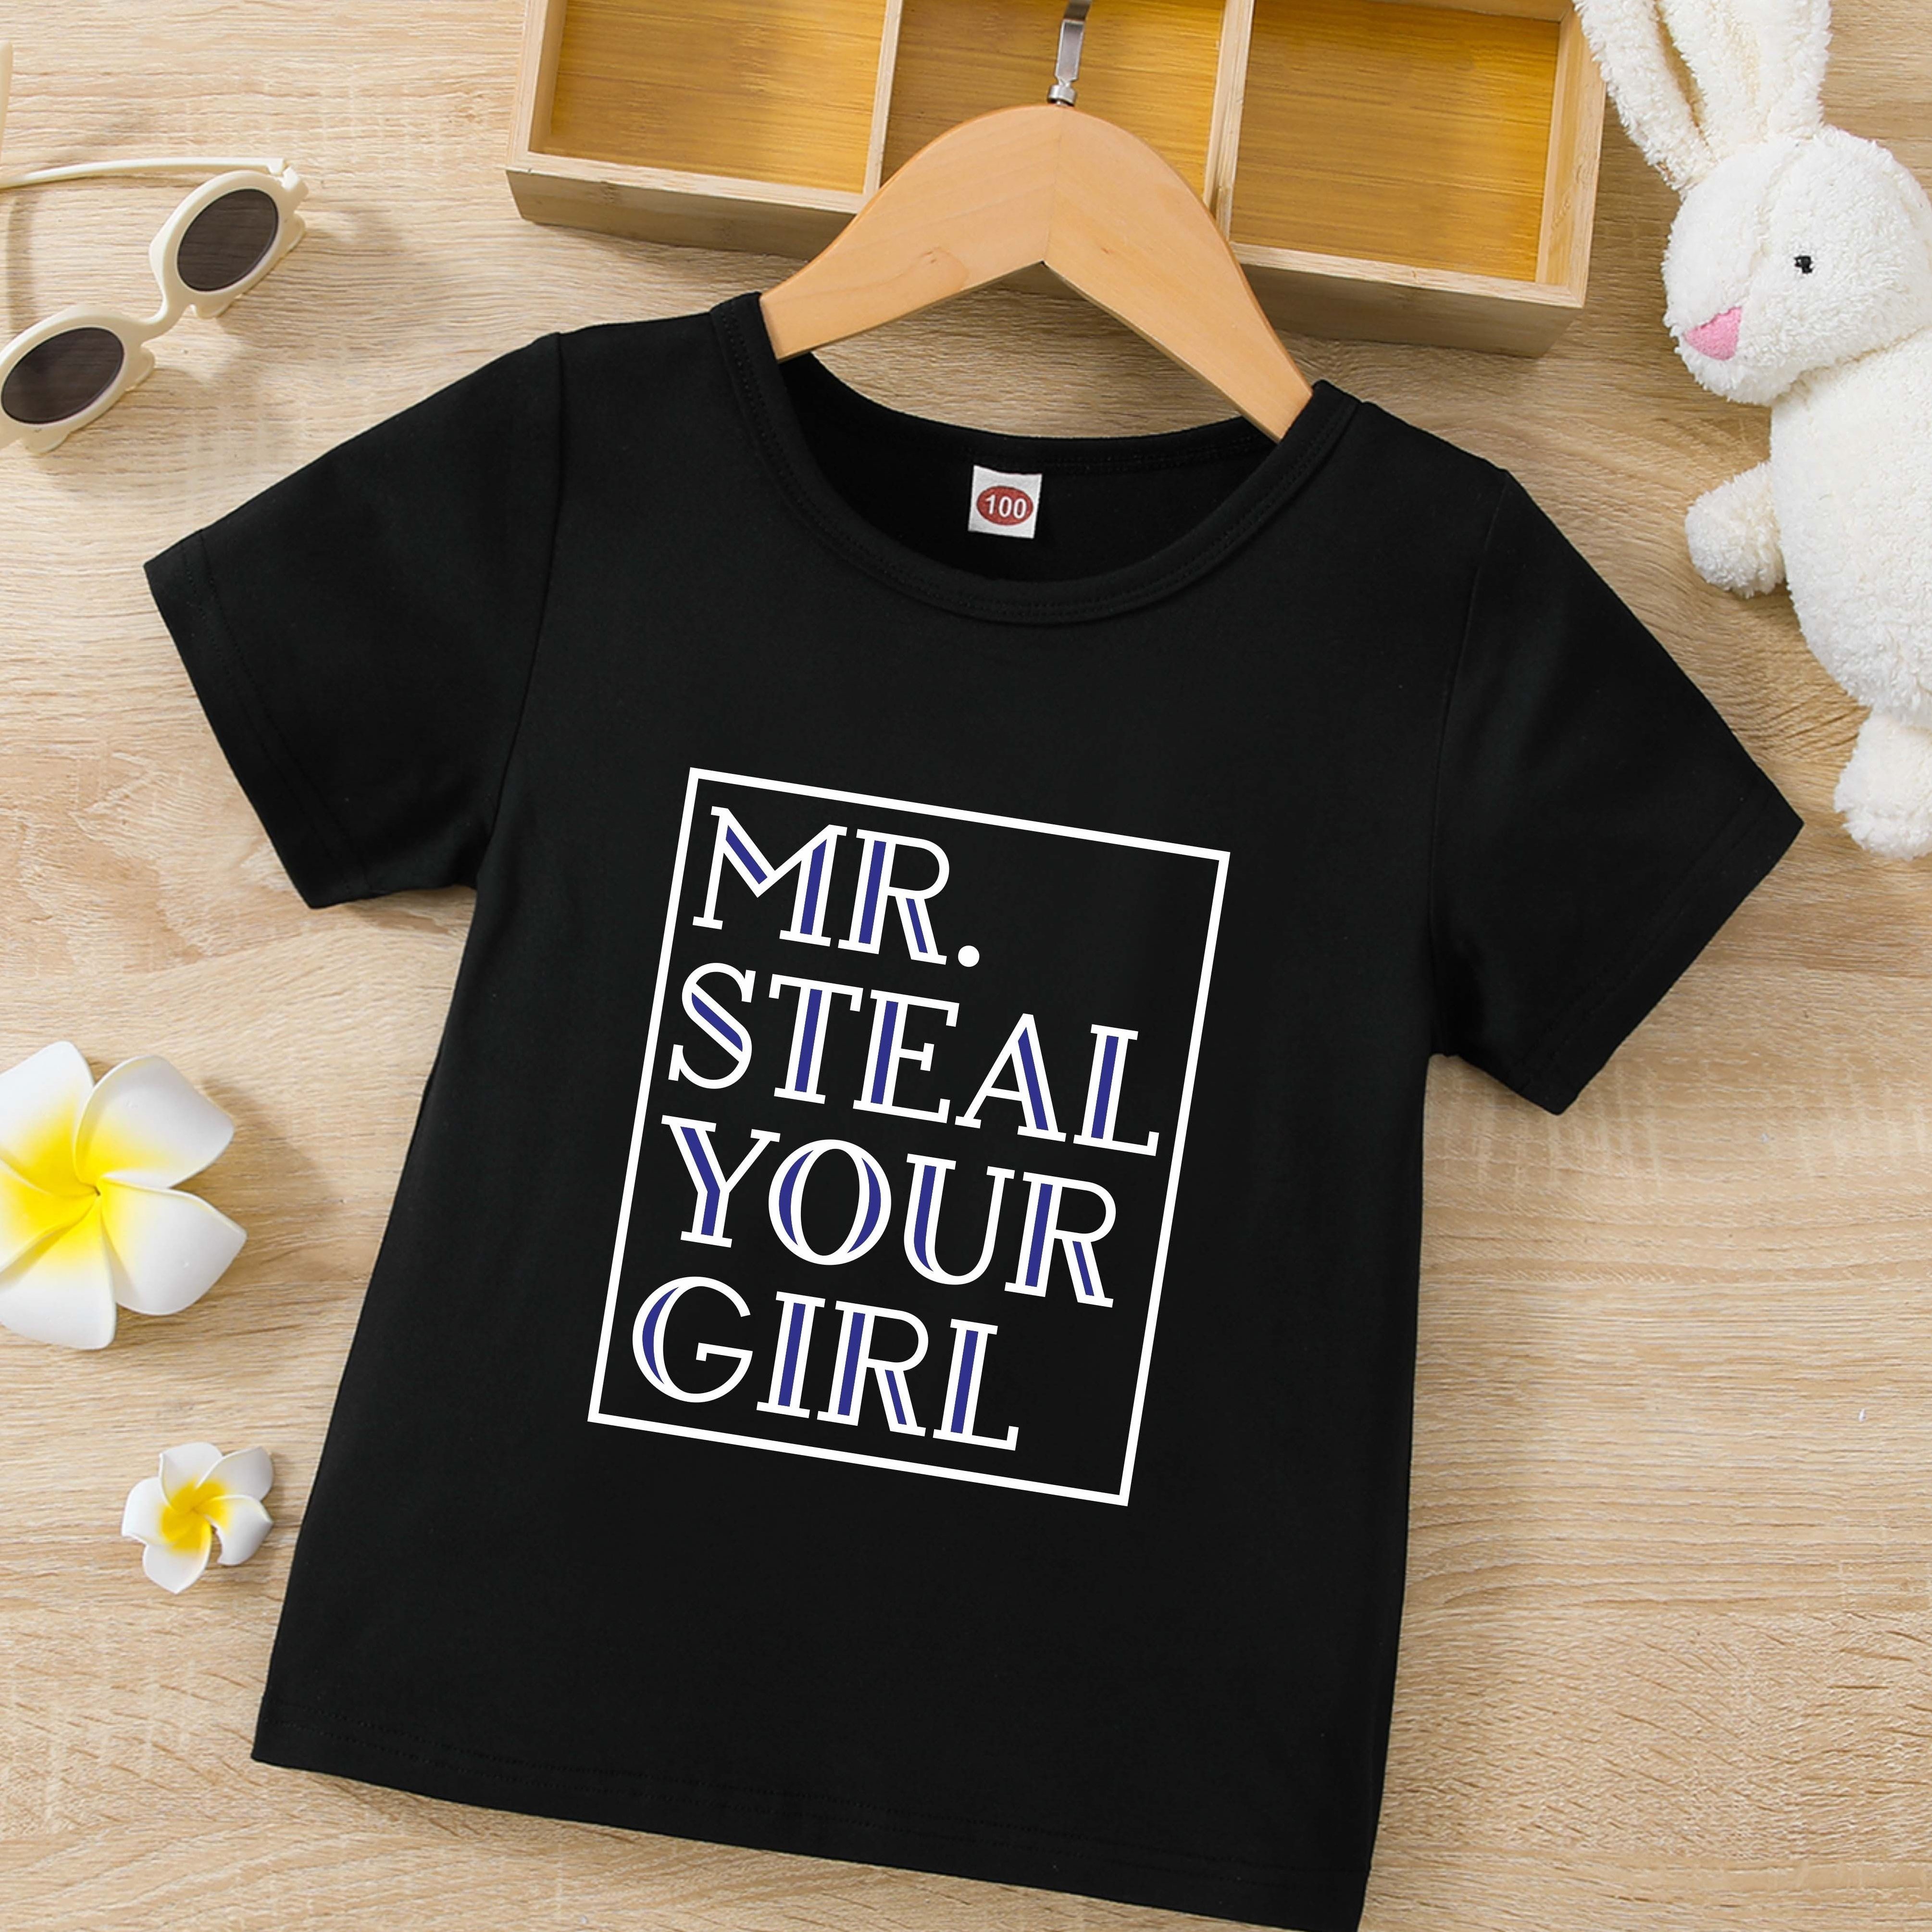 

mr Steal Your Girl" T-shirt, Round Neck Tees Tops Soft Comfortable, Boys And Girls Summer Clothes